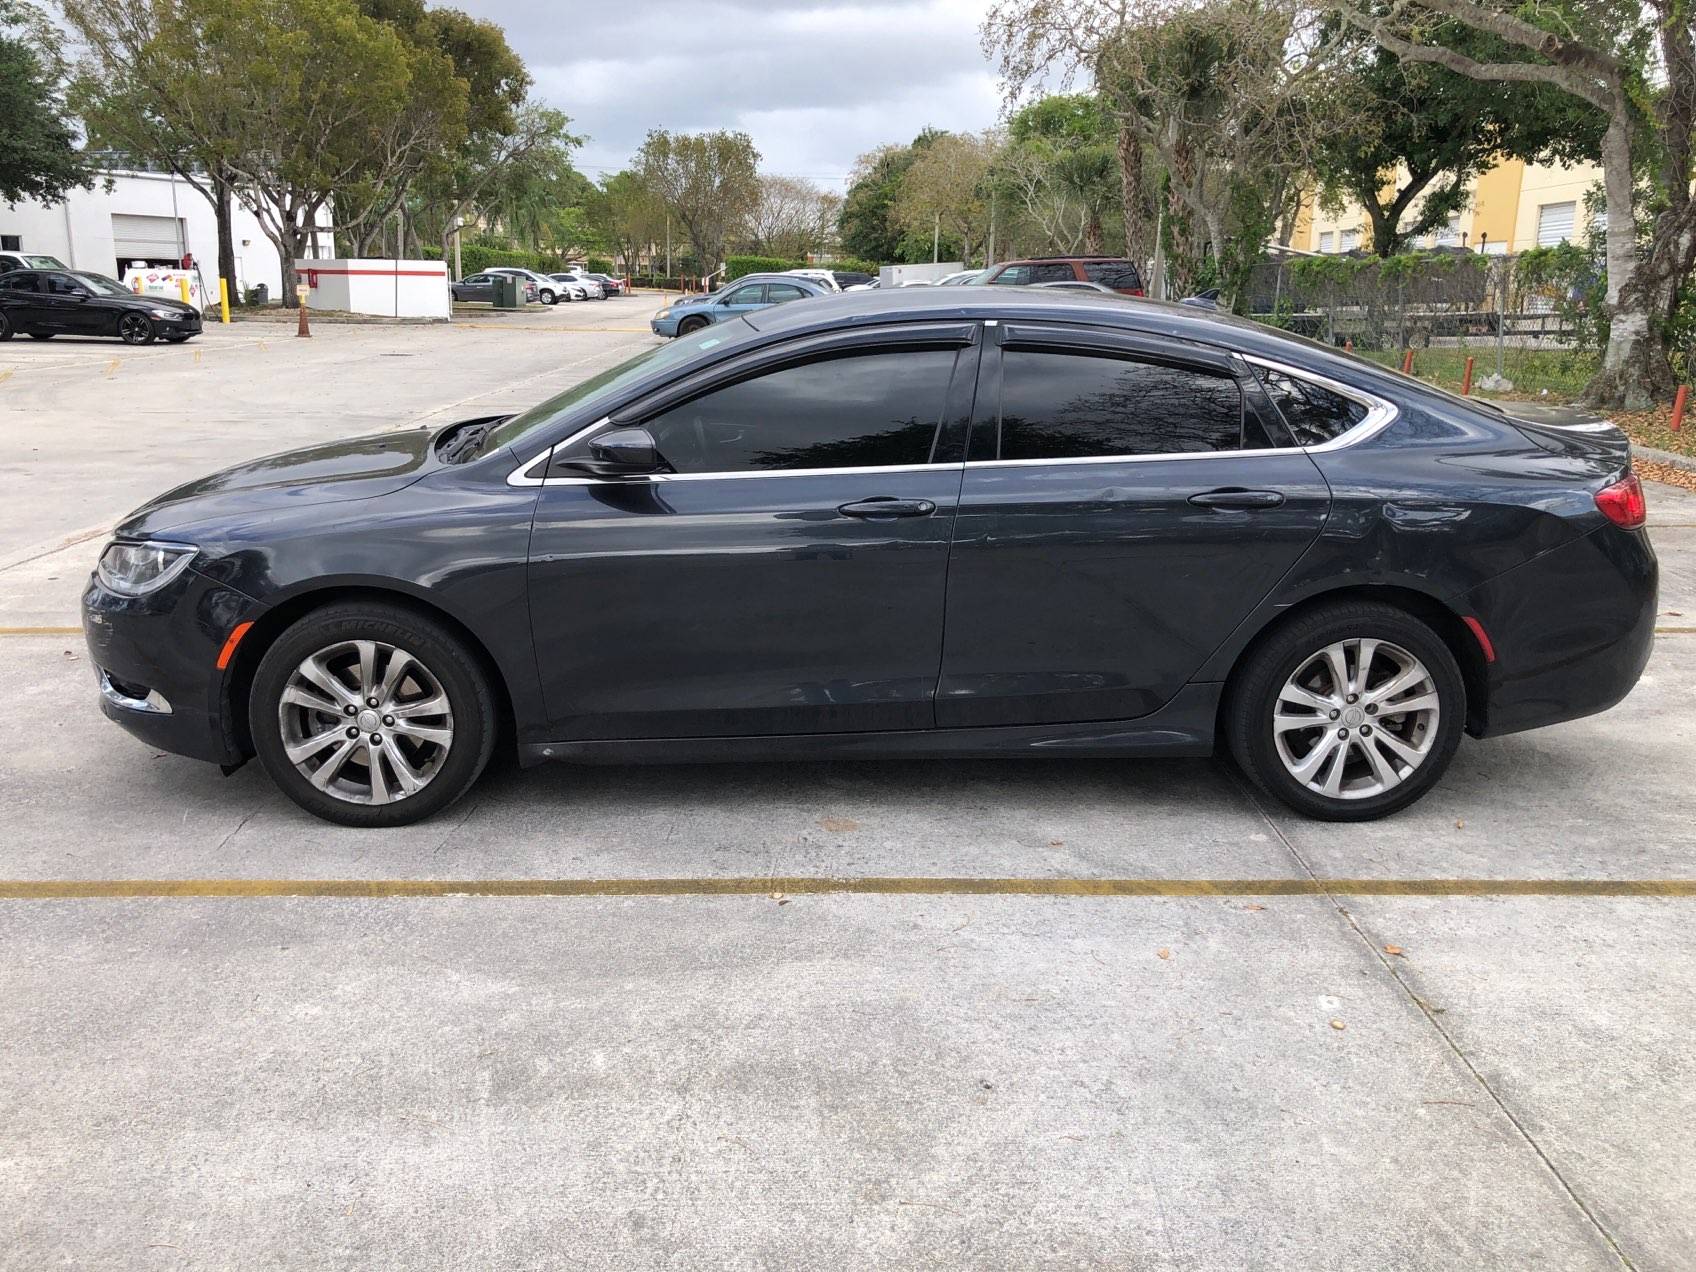 Used 2017 CHRYSLER 200 LIMITED PLATINUM for sale in MIAMI | 121060